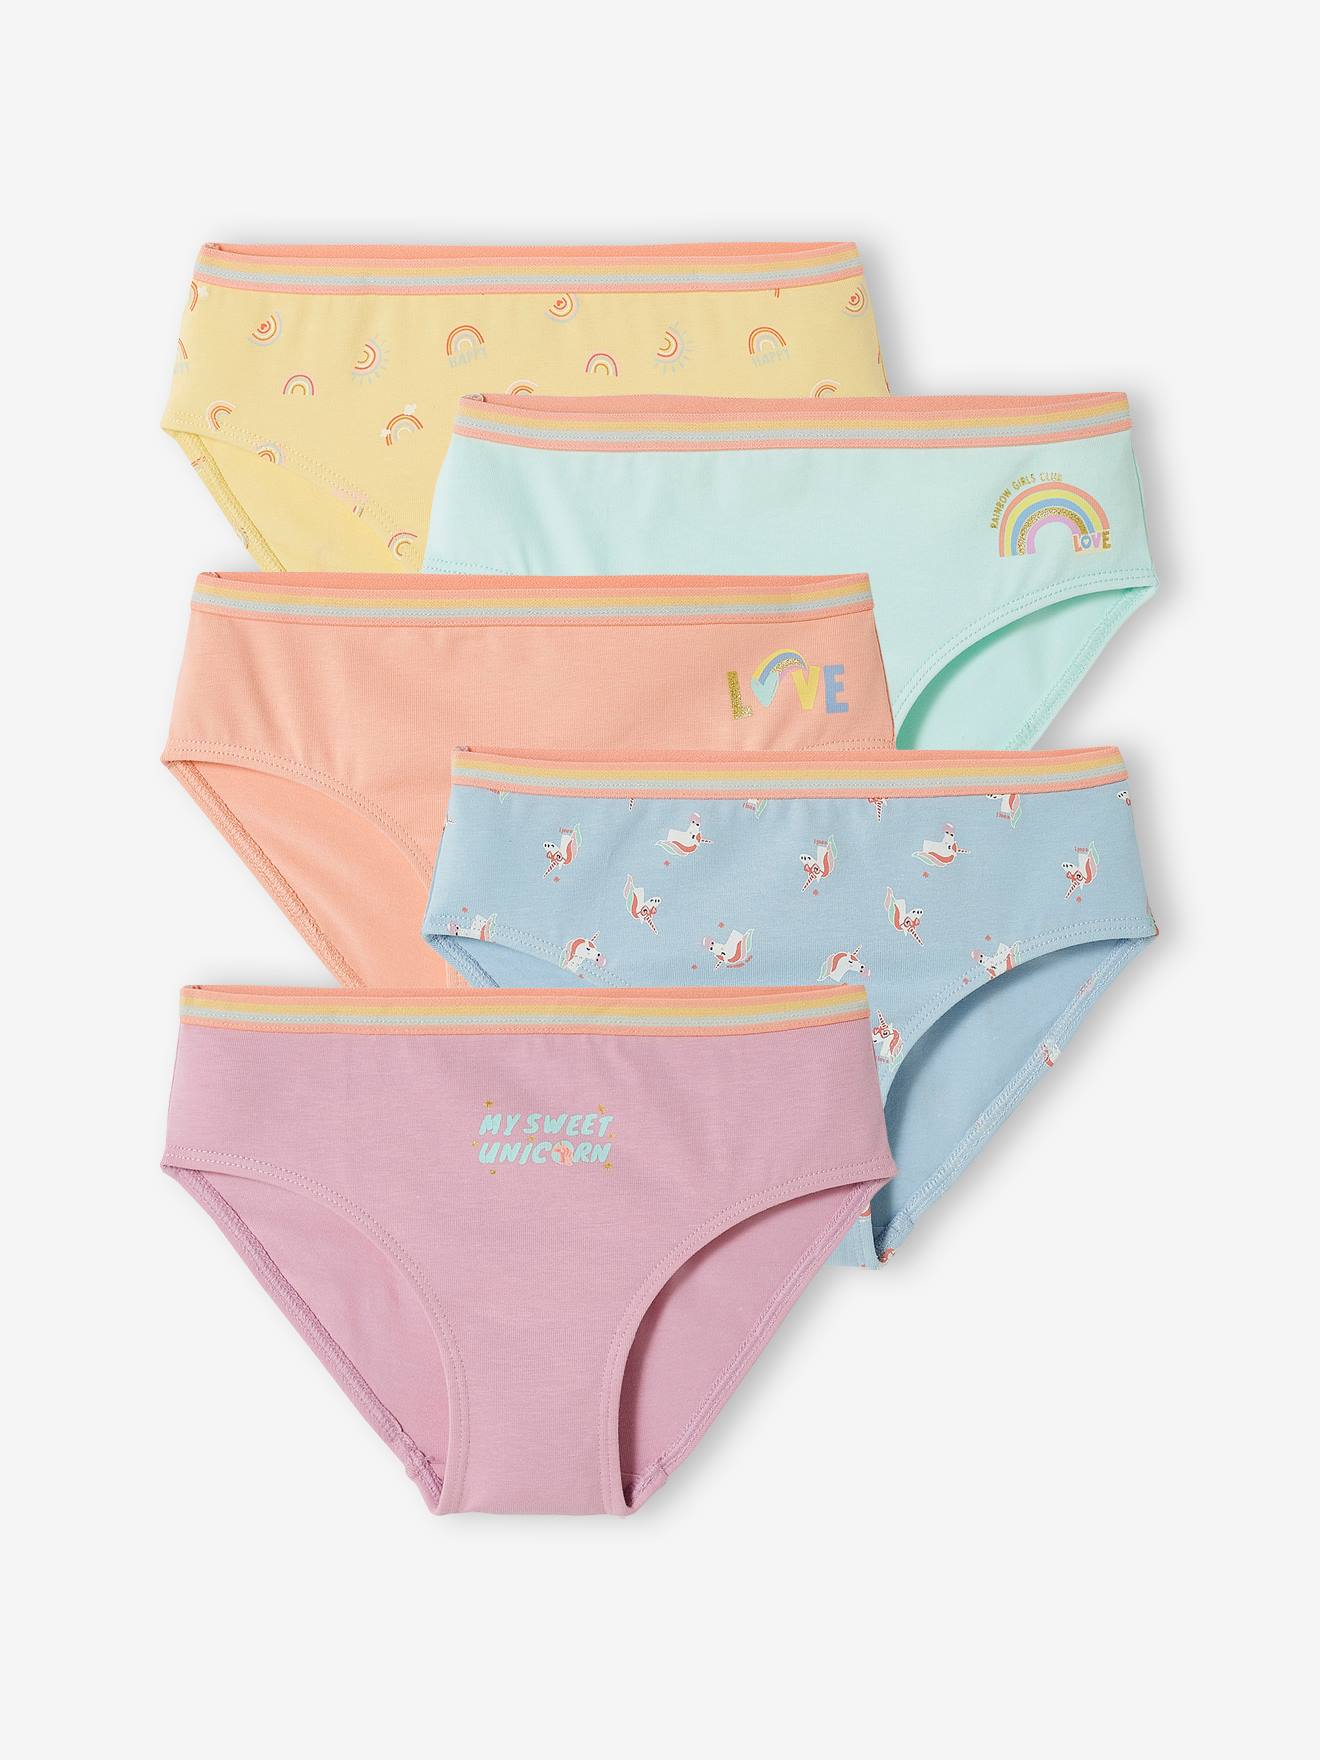 Pack of 5 Unicorn Briefs for Girls - purple medium solid with